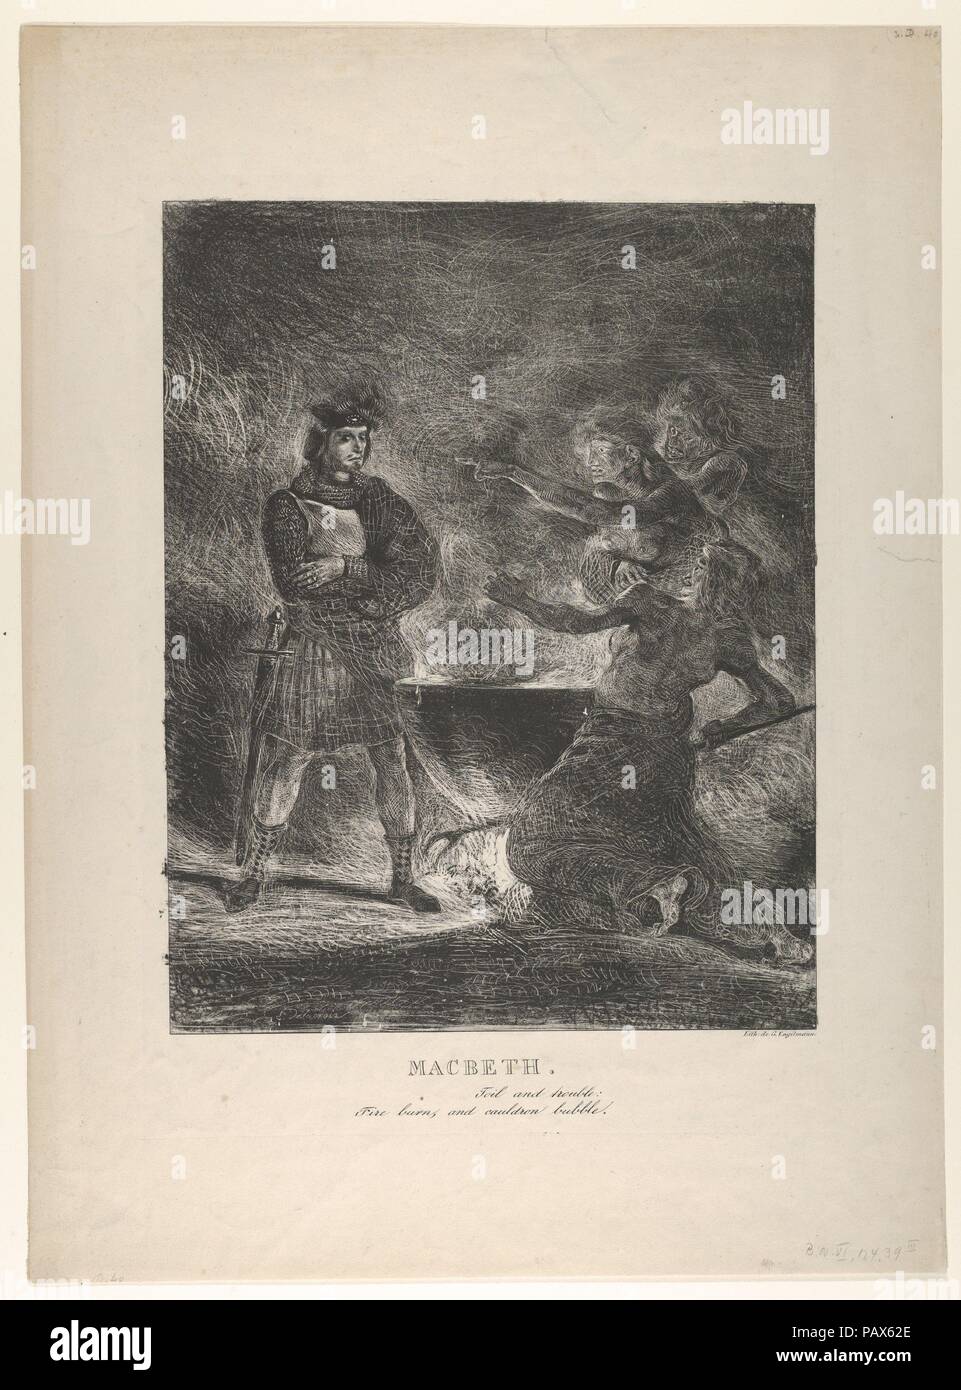 Macbeth Consulting the Witches. Artist: Eugène Delacroix (French, Charenton-Saint-Maurice 1798-1863 Paris). Dimensions: Image: 12 9/16 × 9 7/8 in. (31.9 × 25.1 cm)  Sheet: 19 3/4 × 13 7/8 in. (50.2 × 35.2 cm). Series/Portfolio: Macbeth, Act 4, Scene 1. Subject: William Shakespeare (British, Stratford-upon-Avon 1564-1616 Stratford-upon-Avon). Date: 1825.  One of Delacroix's most striking prints, 'Macbeth Consulting the Witches' owes its dynamic technique to the lithographs of Goya, whose monumental bullfight scenes had just been published in Bordeaux. Datable to 1825, this is probably Delacroix Stock Photo